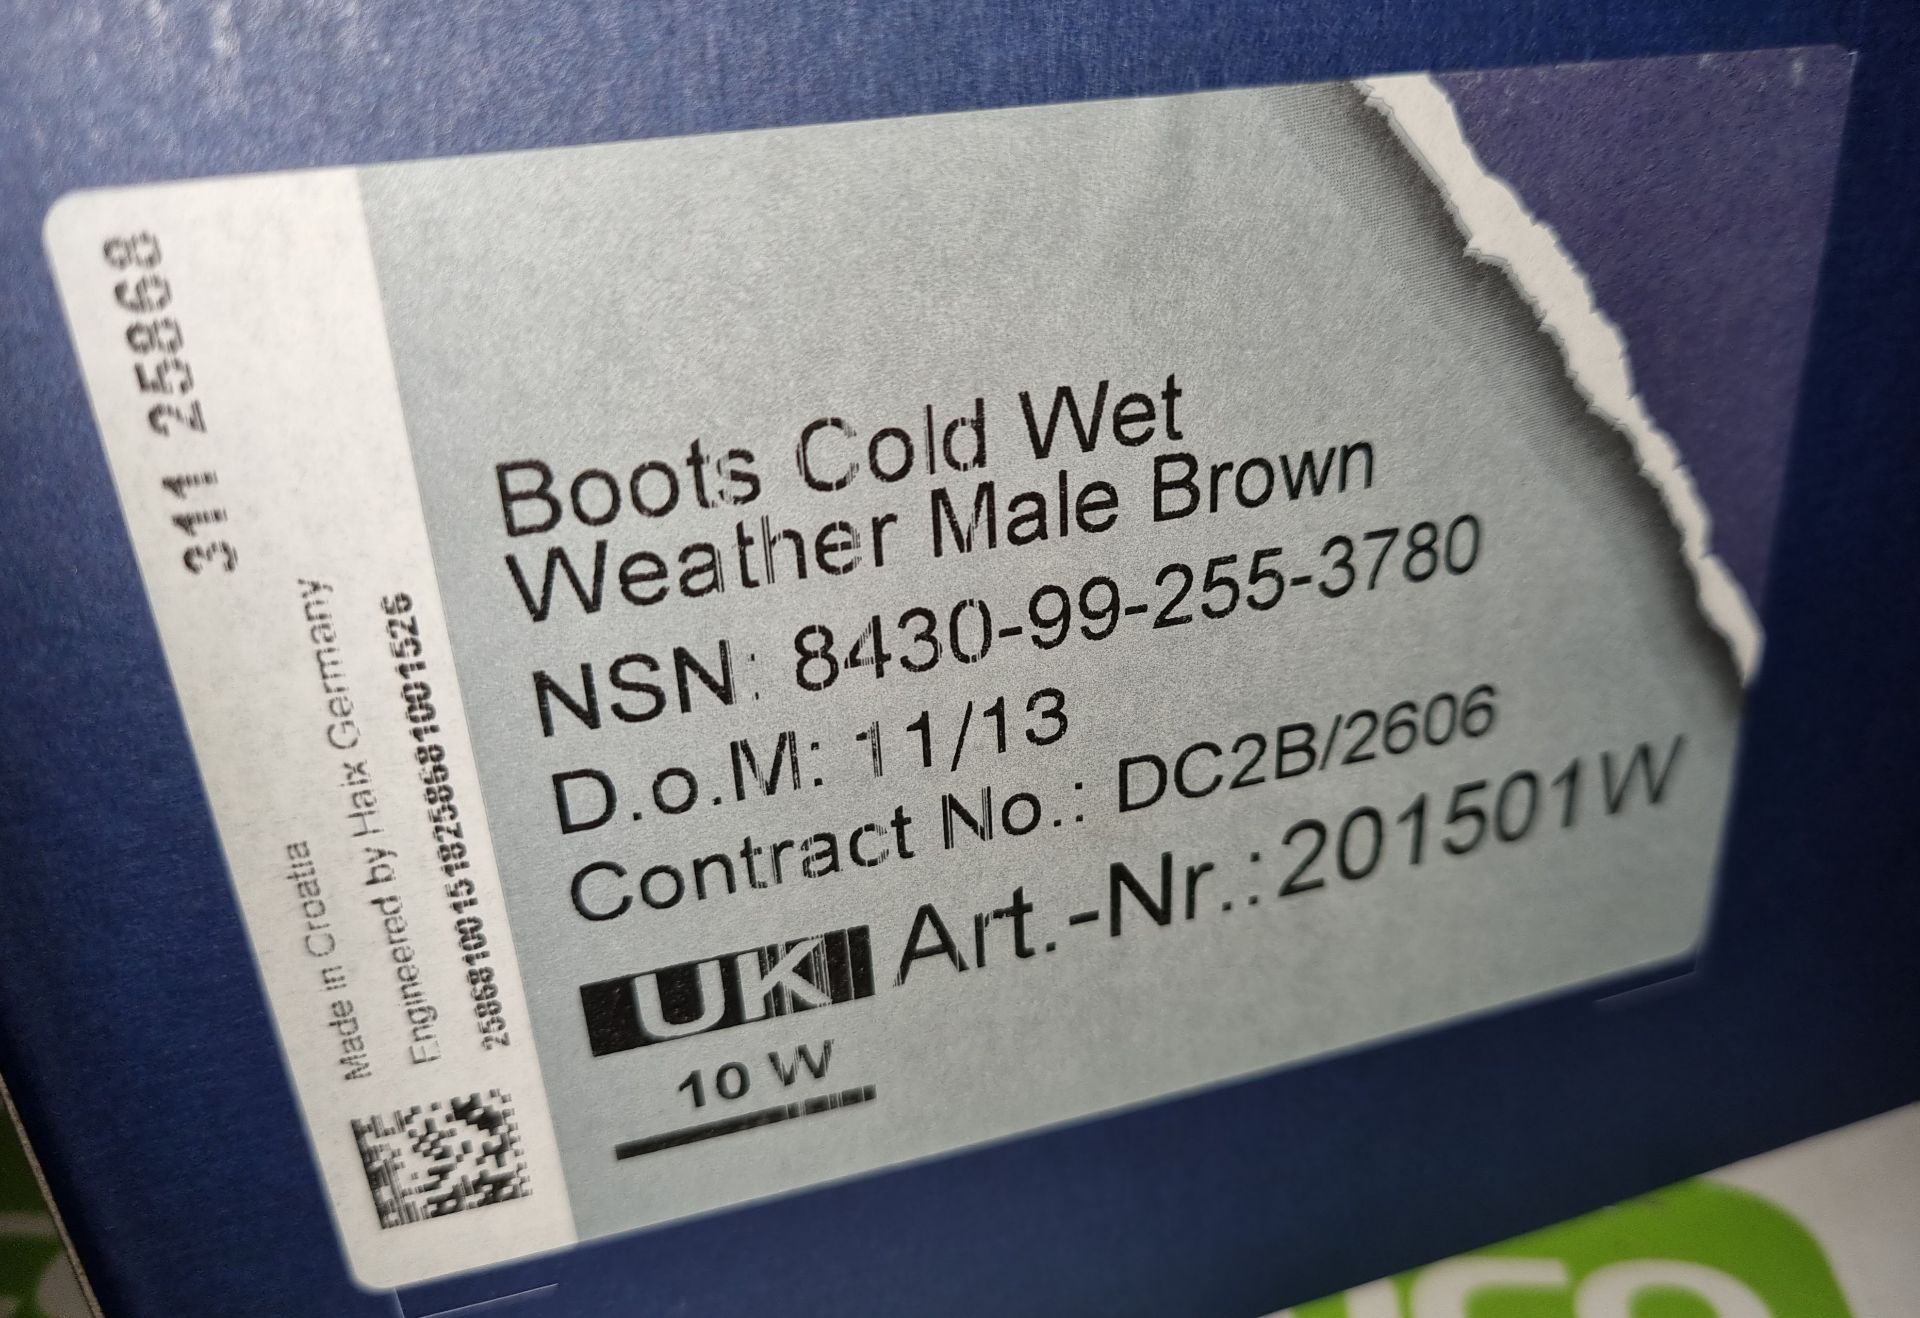 1x pair of Haix cold wet weather boots - Size 10W - Image 3 of 4